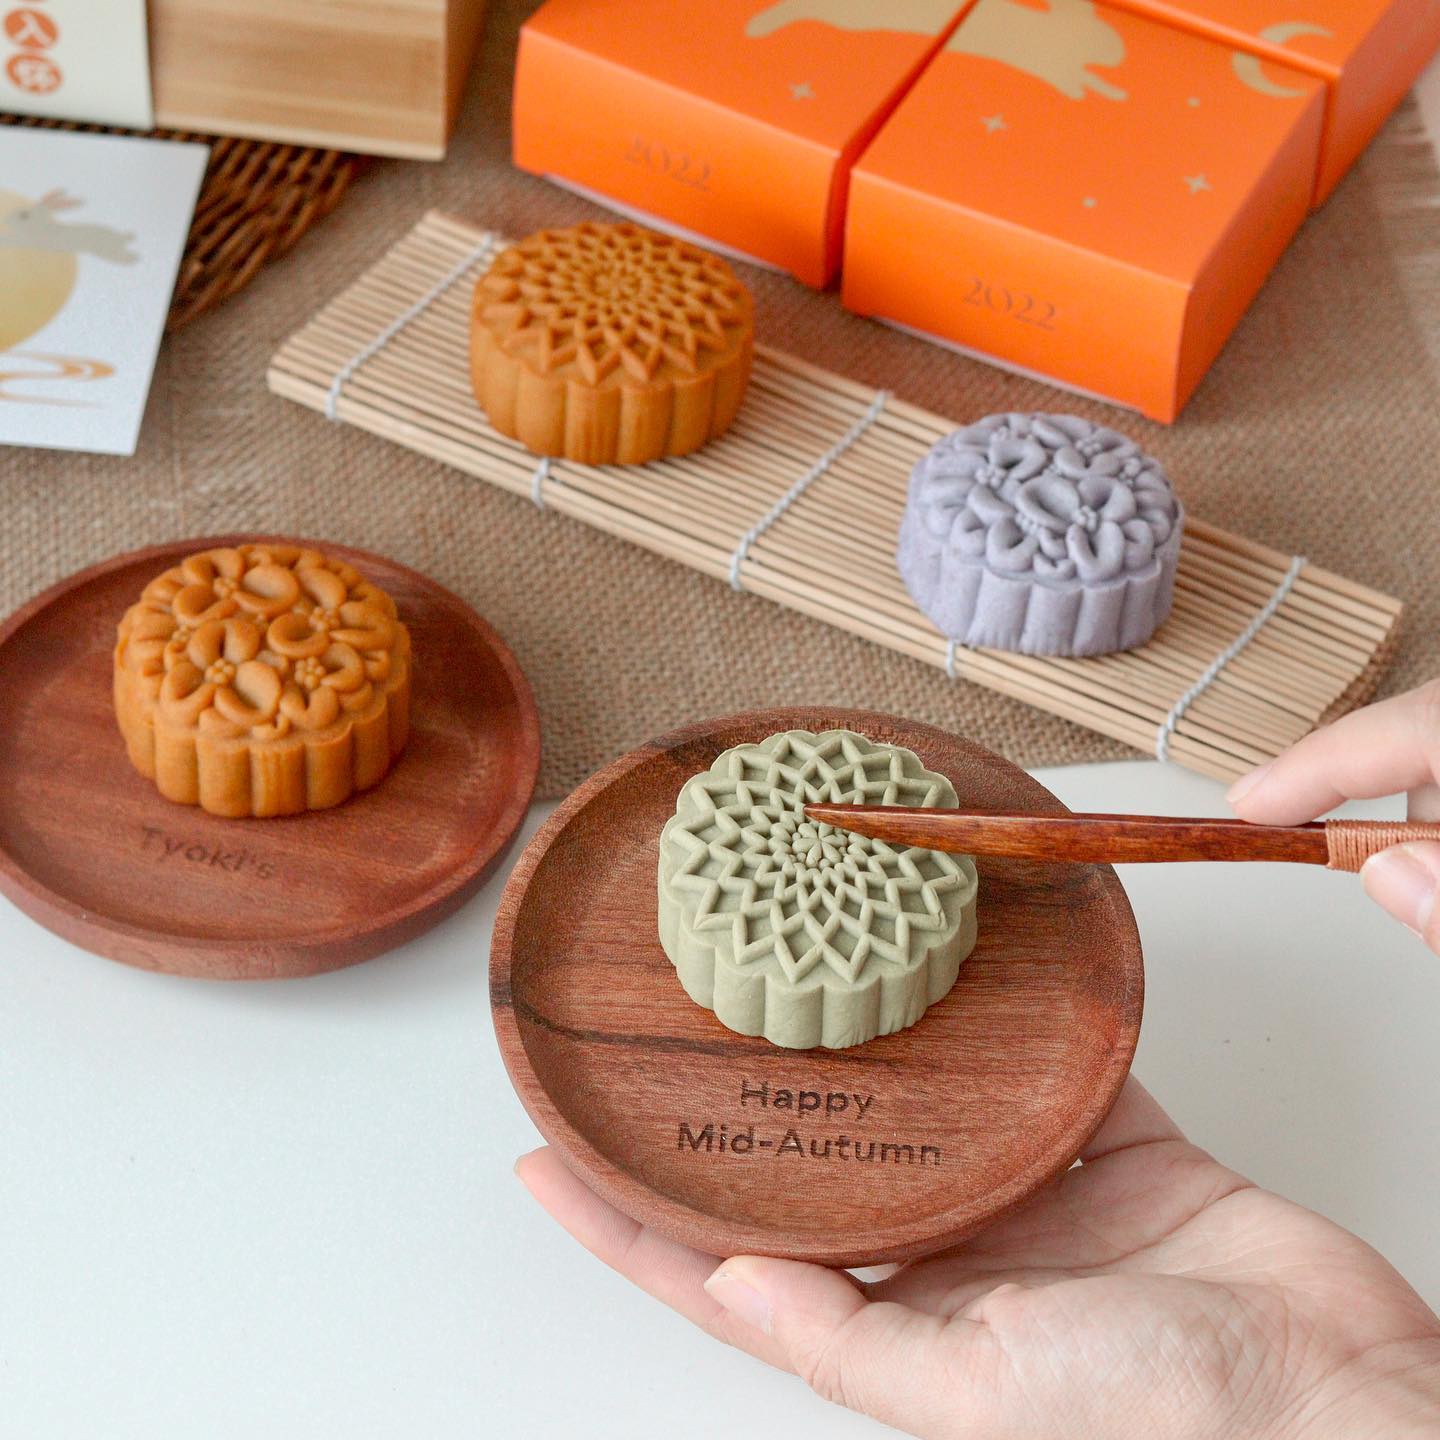 Mid-Autumn Festival Features yellow mooncake gift box 比比赞爆浆奶